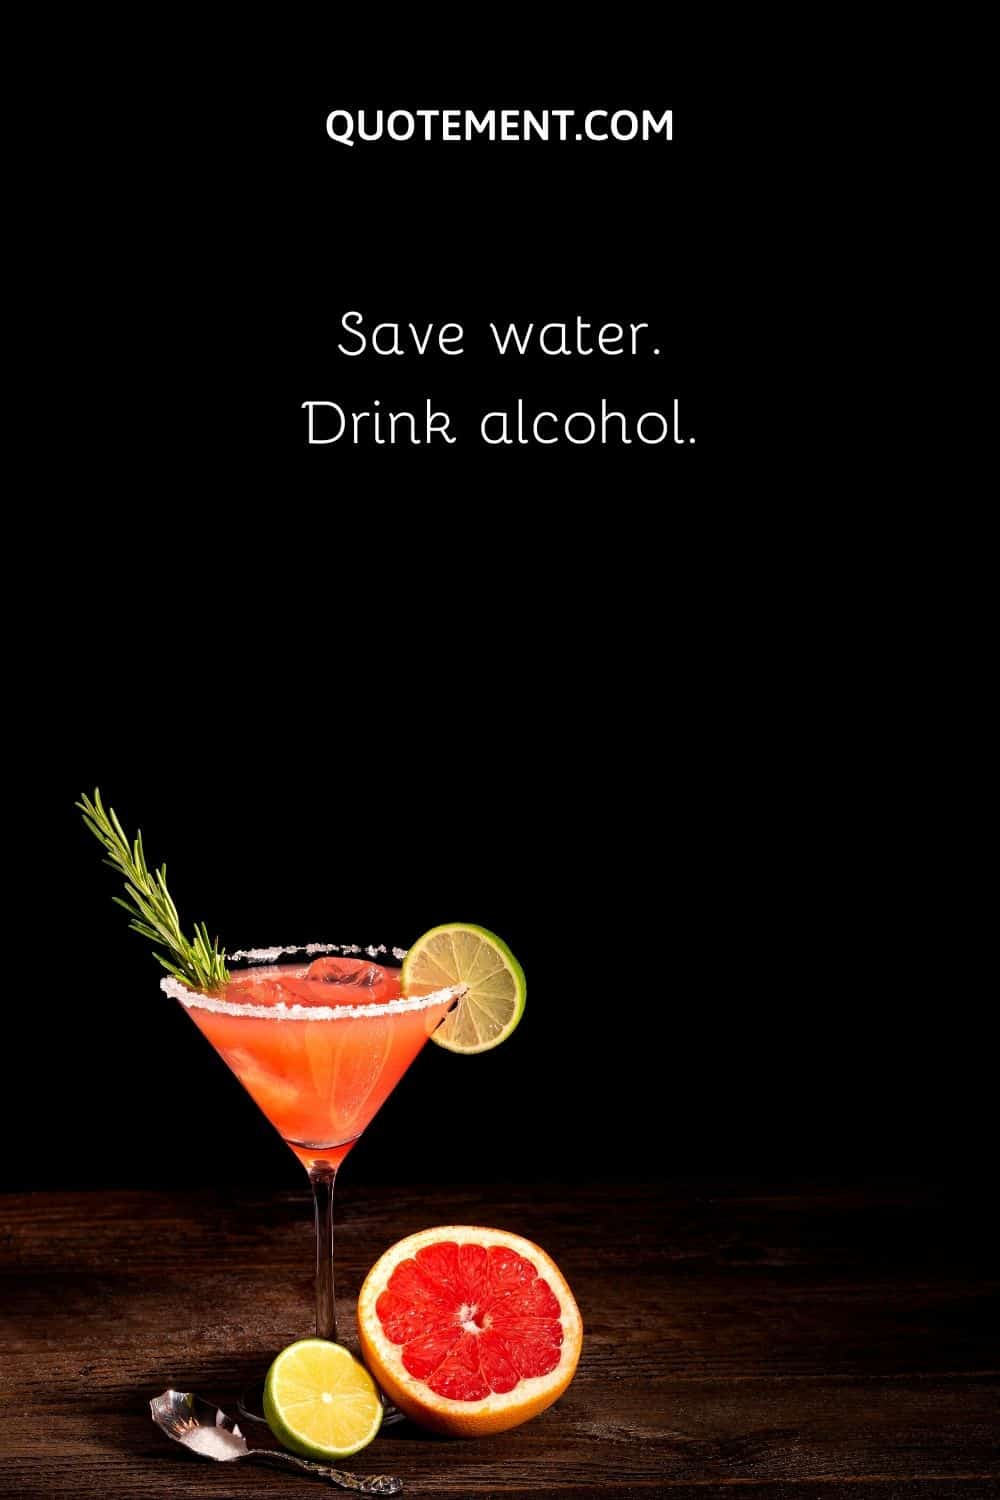 Save water. Drink alcohol.